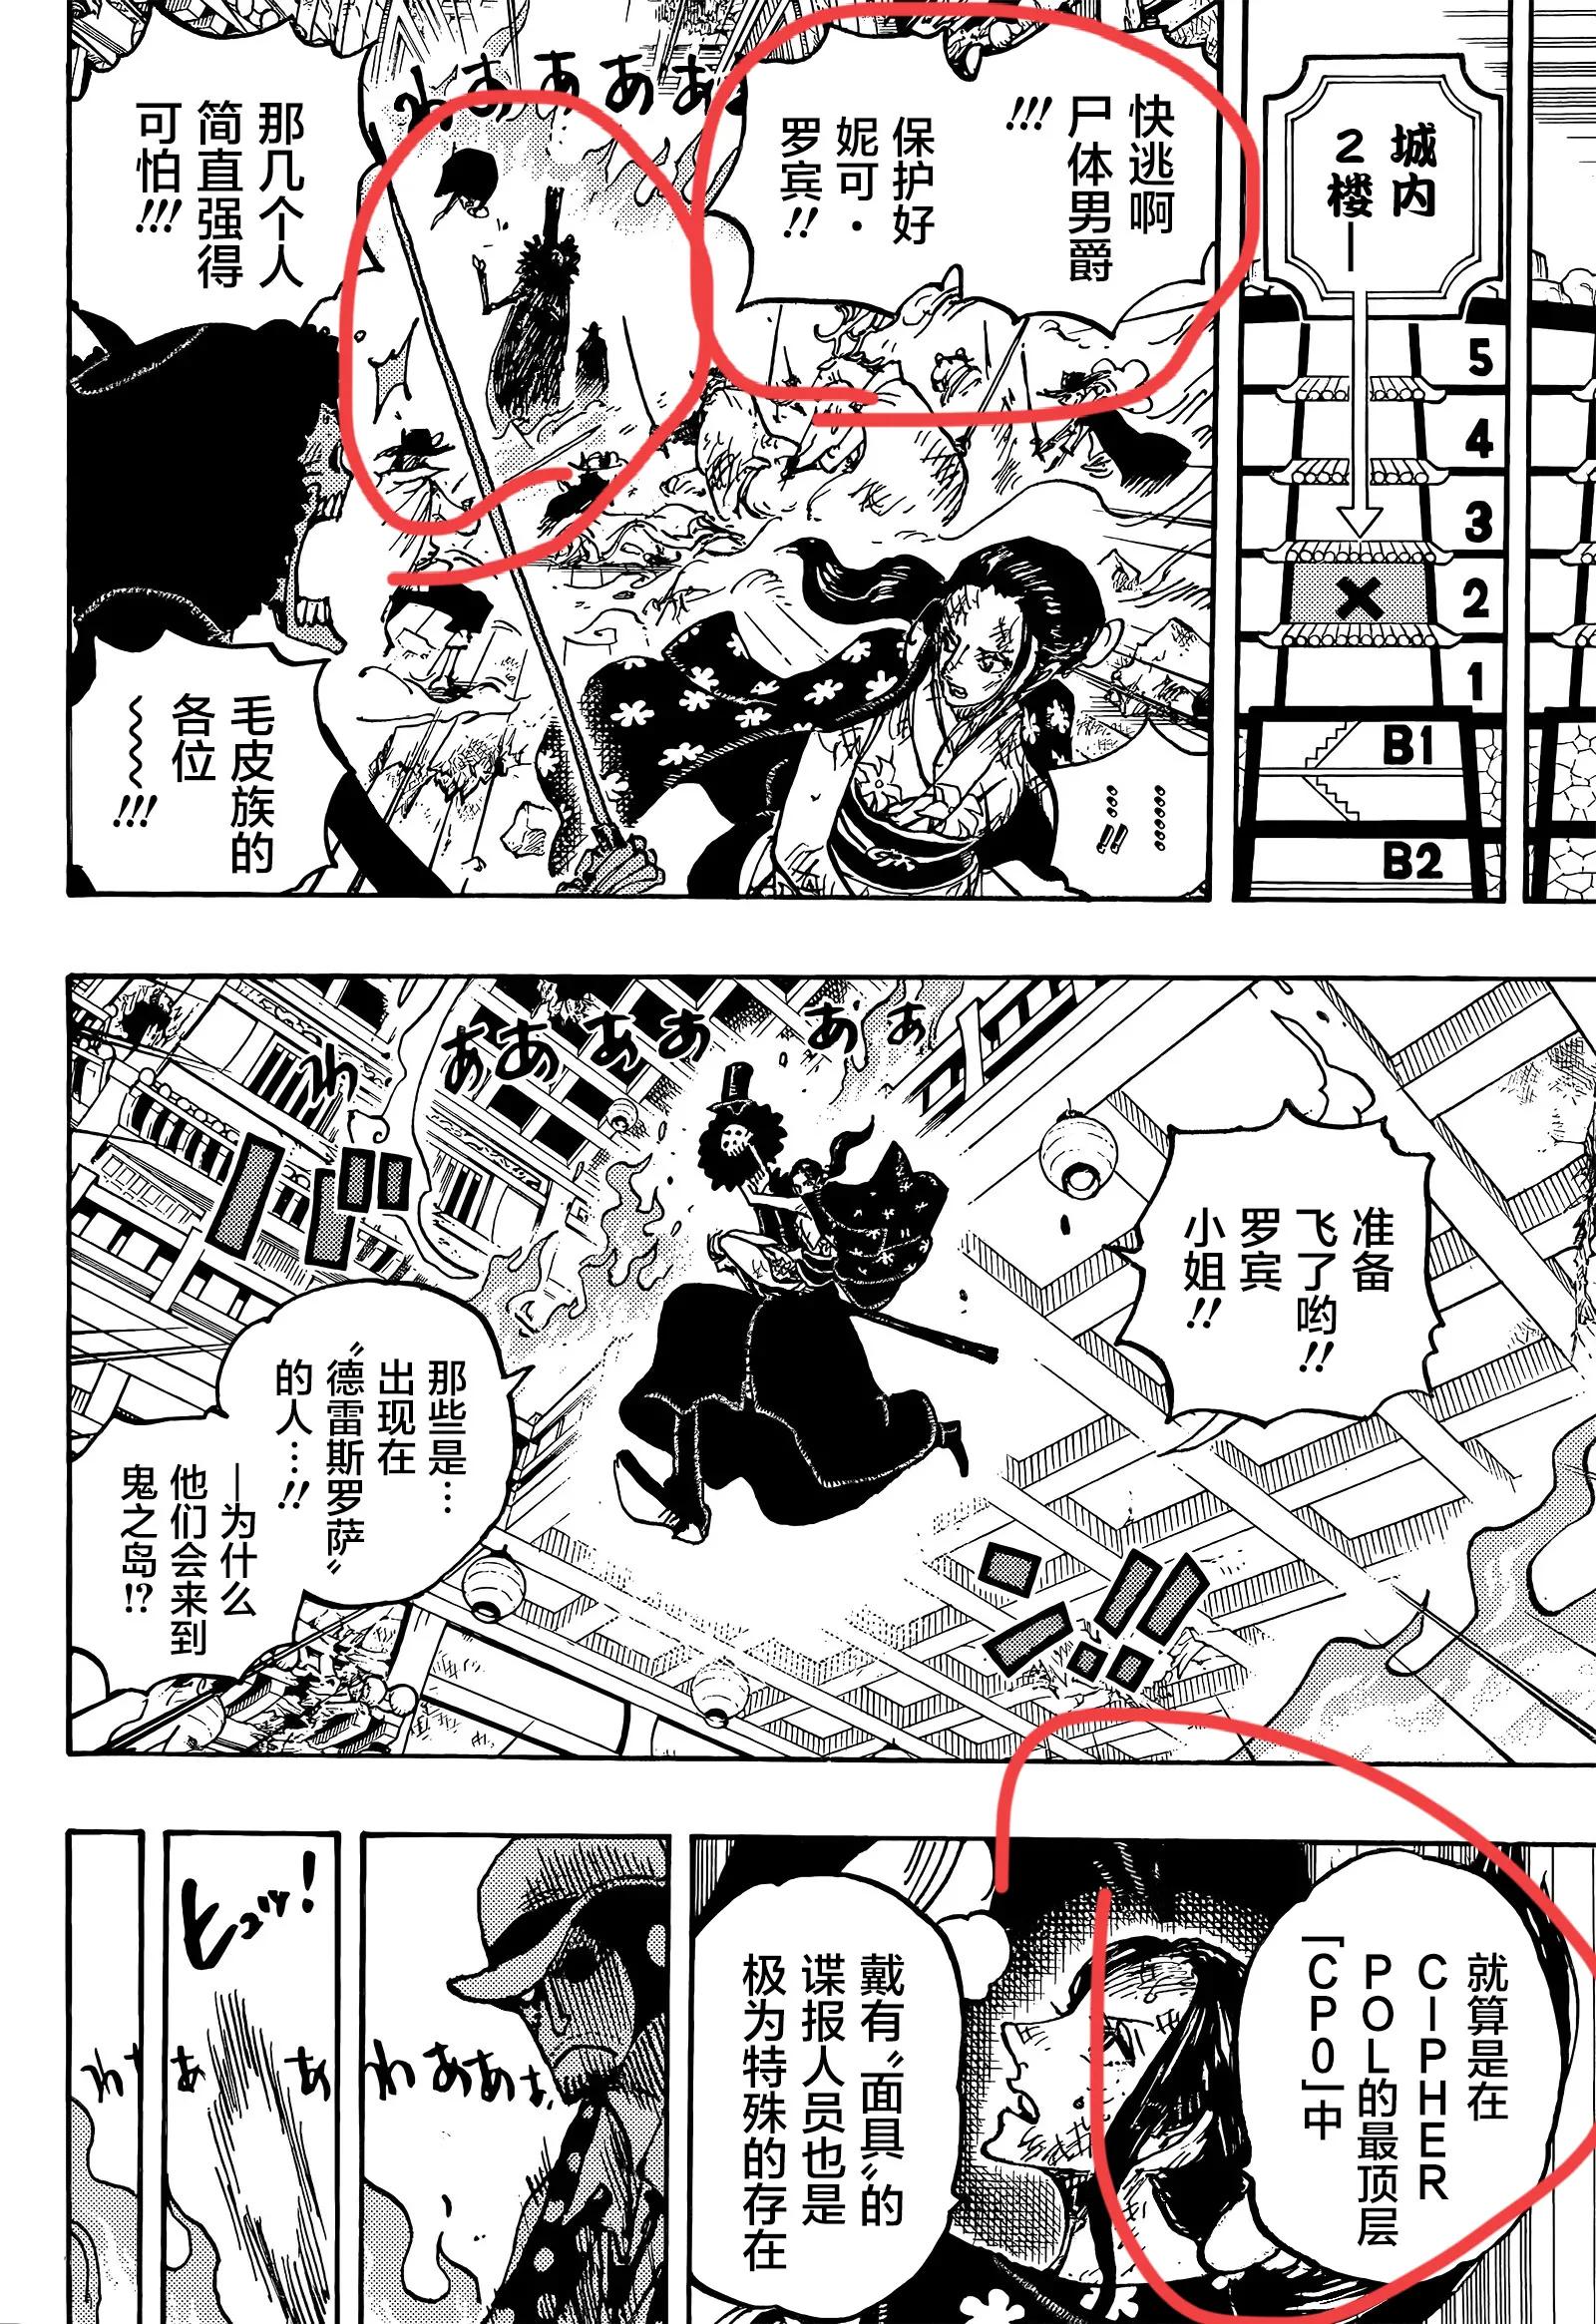 One Piece Chapter 1032 Apple Drake Vs Two Cp0 Inews